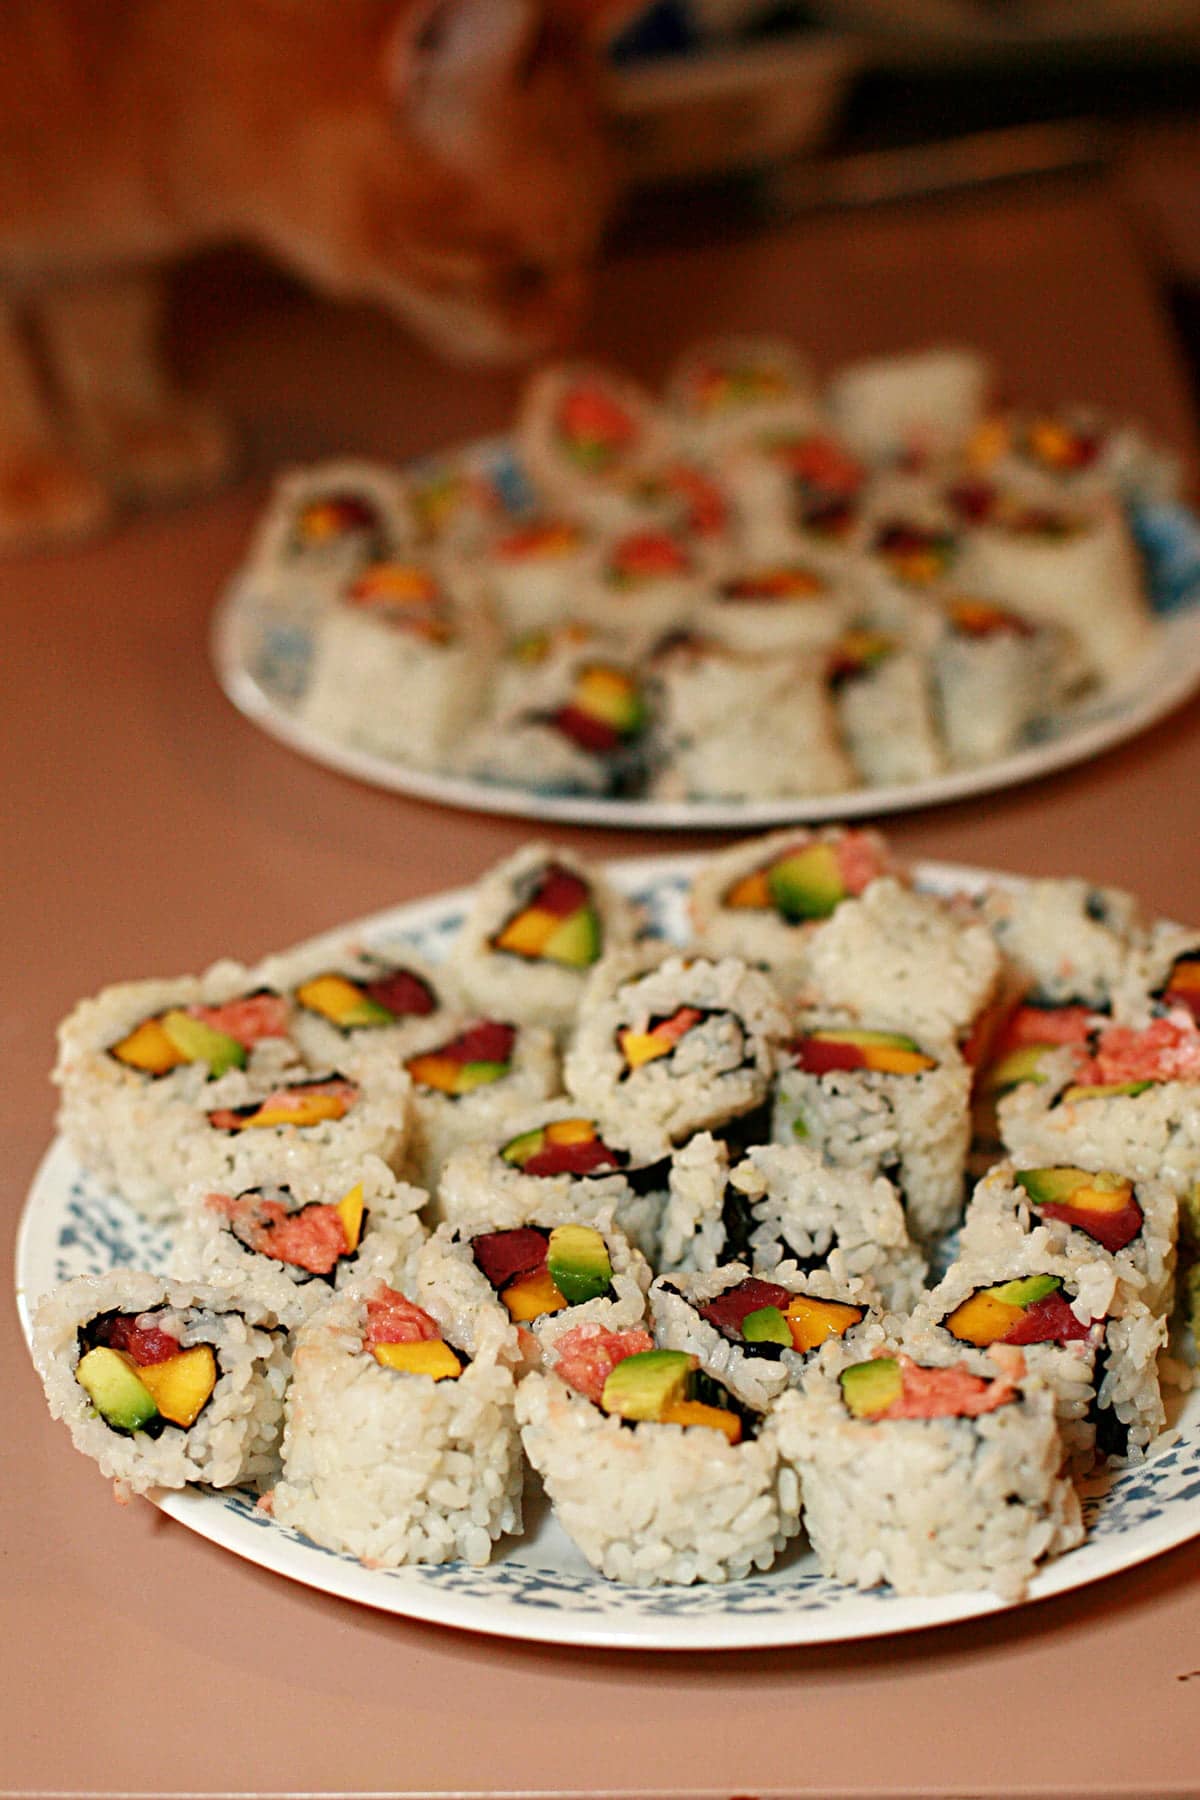 Two plates with dozens of pieces of DIY  sushi are shown on a pink countertop.